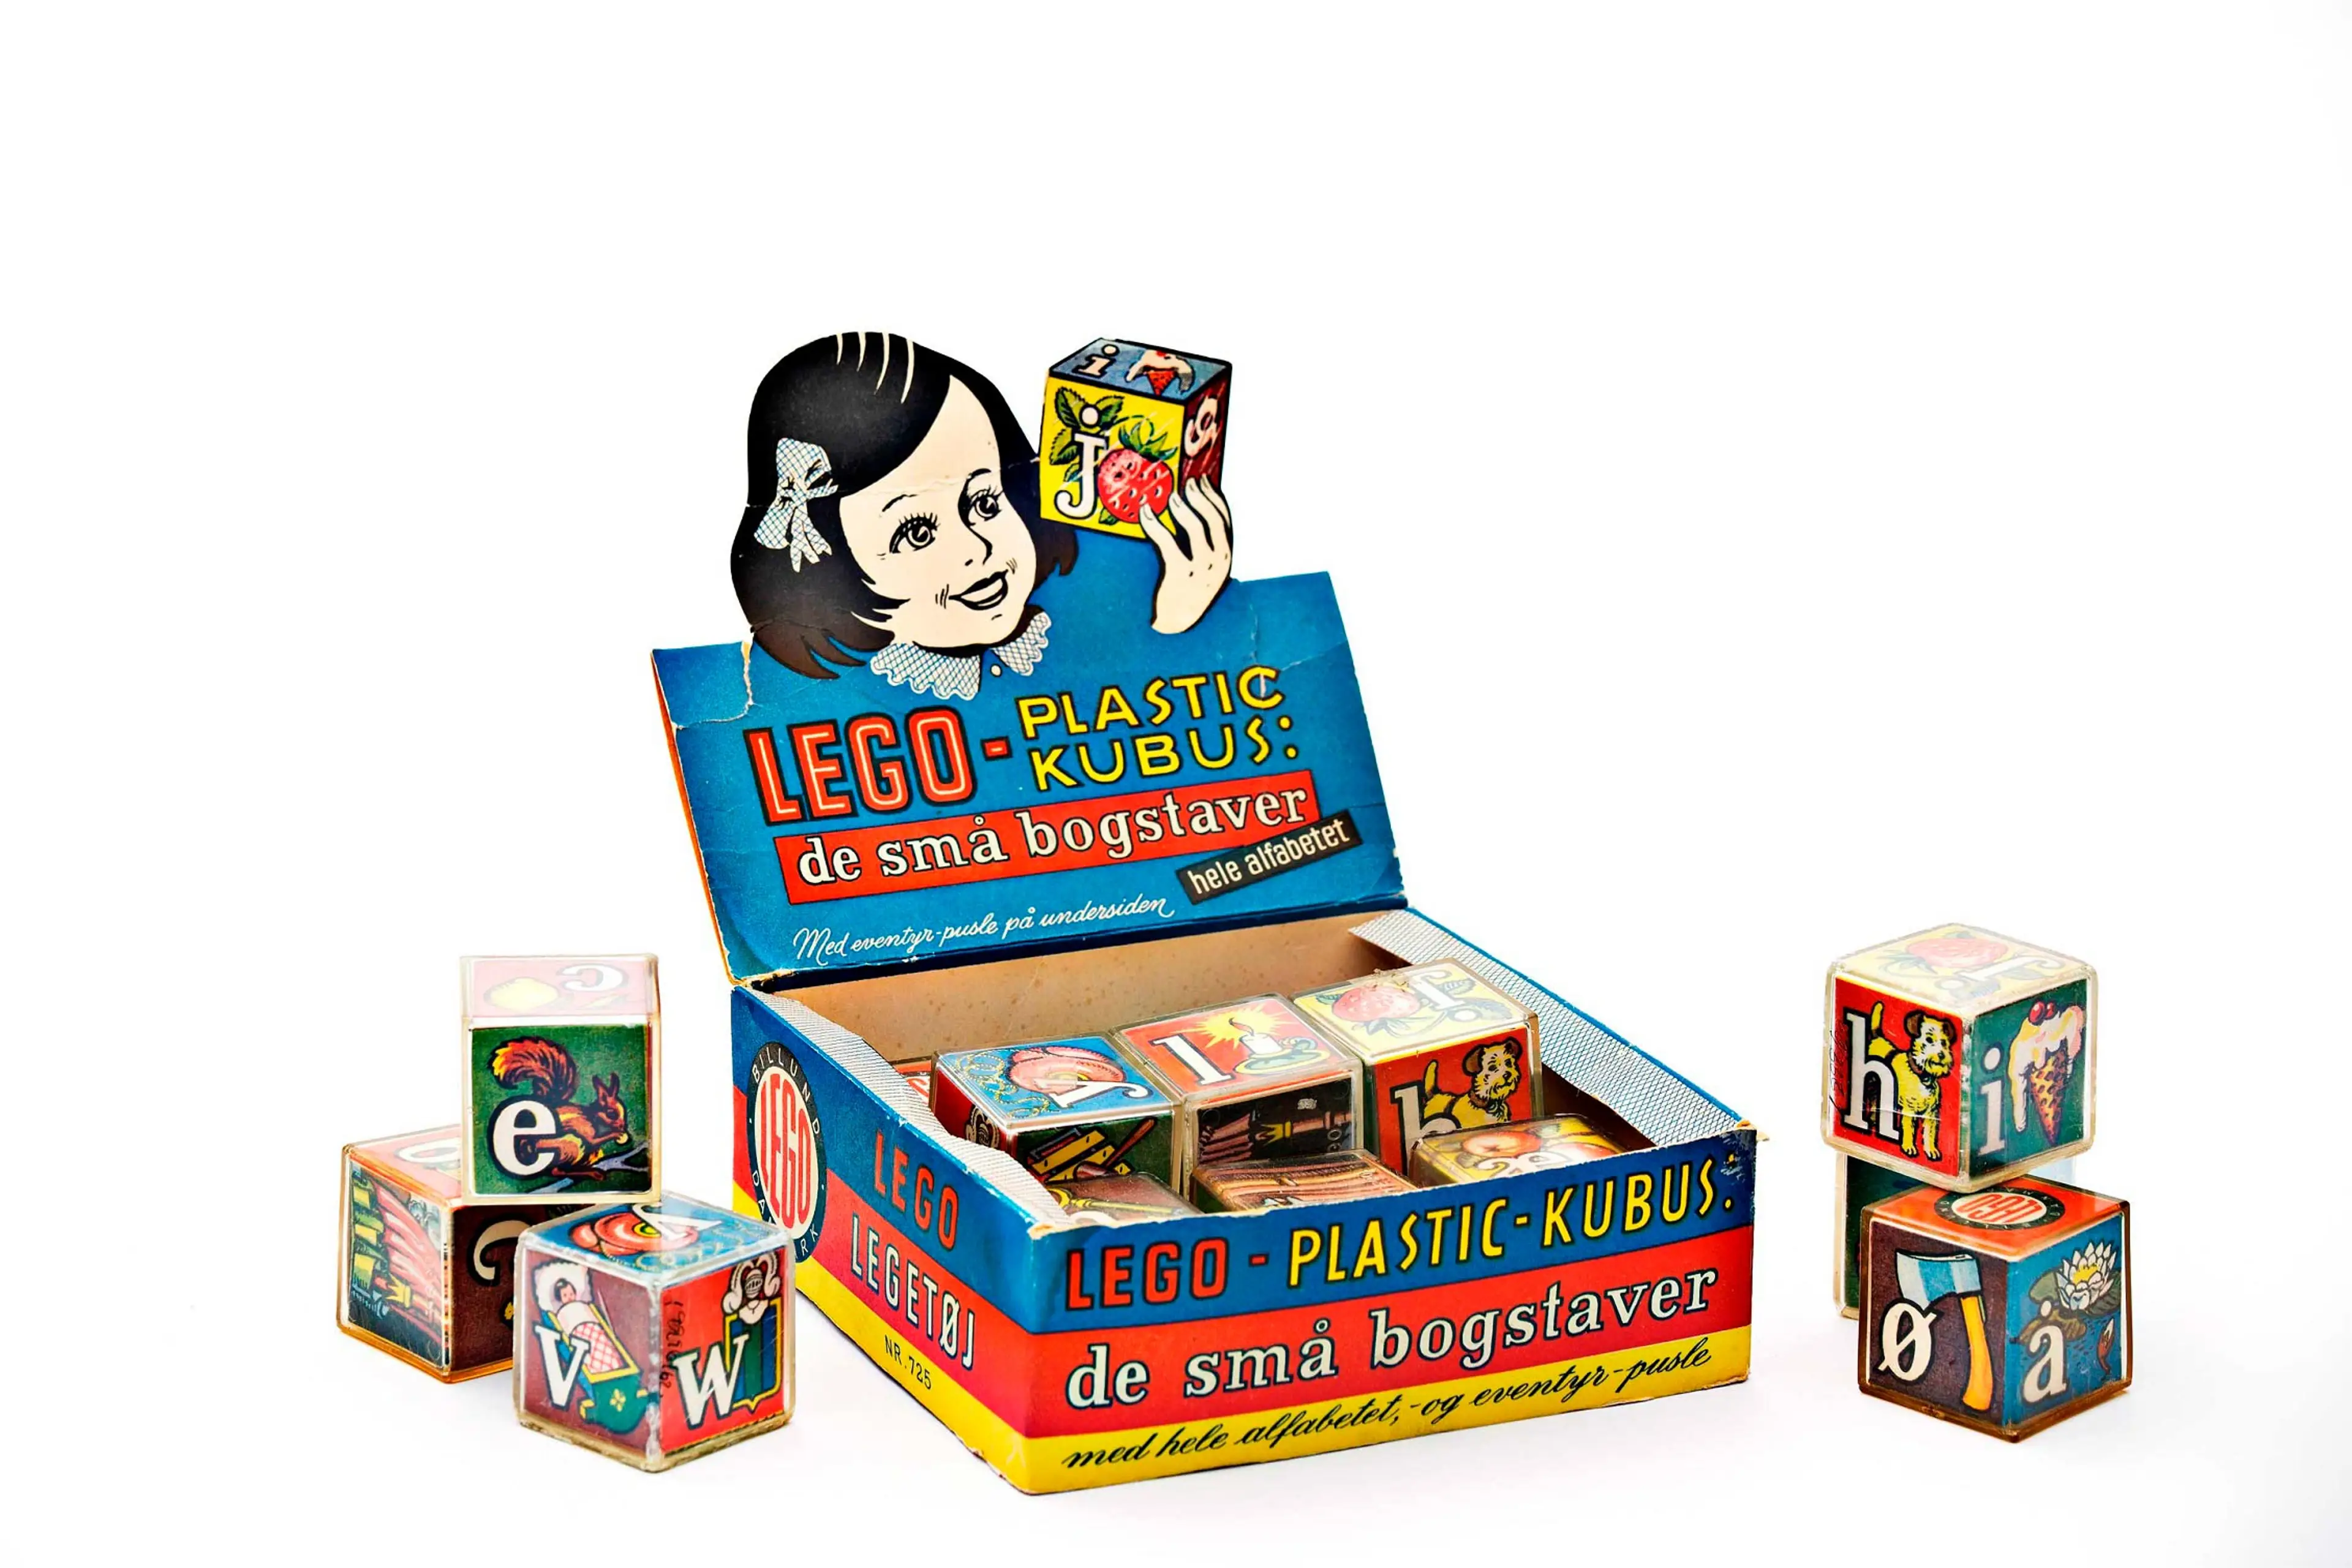 LEGO products produced in Norway in the early 1950s